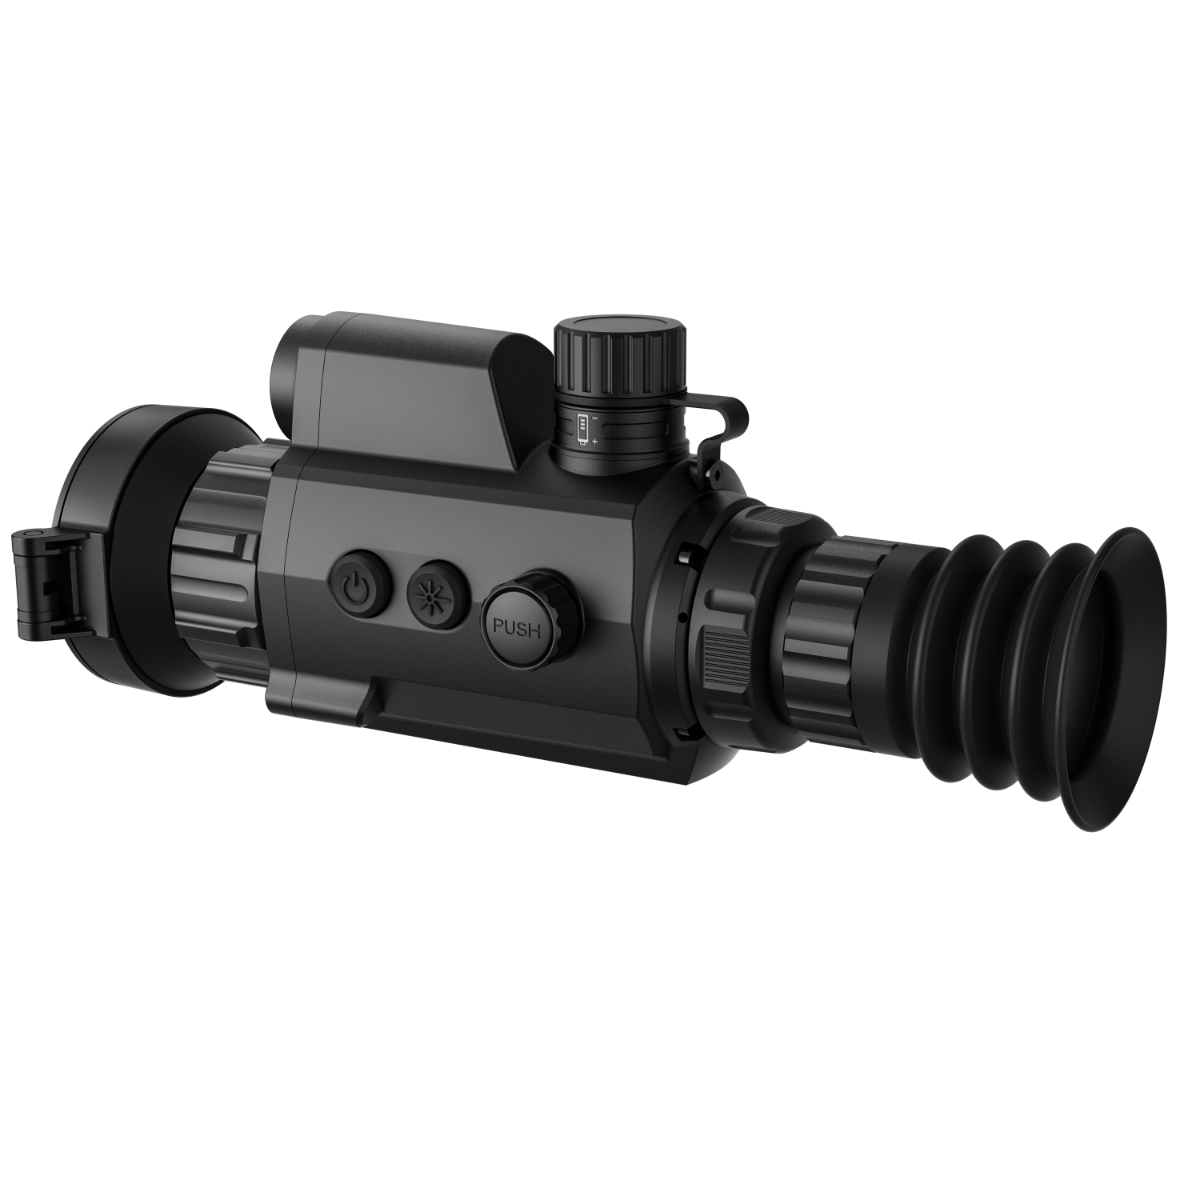 HIKMICRO PANTHER 2.0 50mm 384px THERMAL RIFLESCOPE LRF PH50L2.0